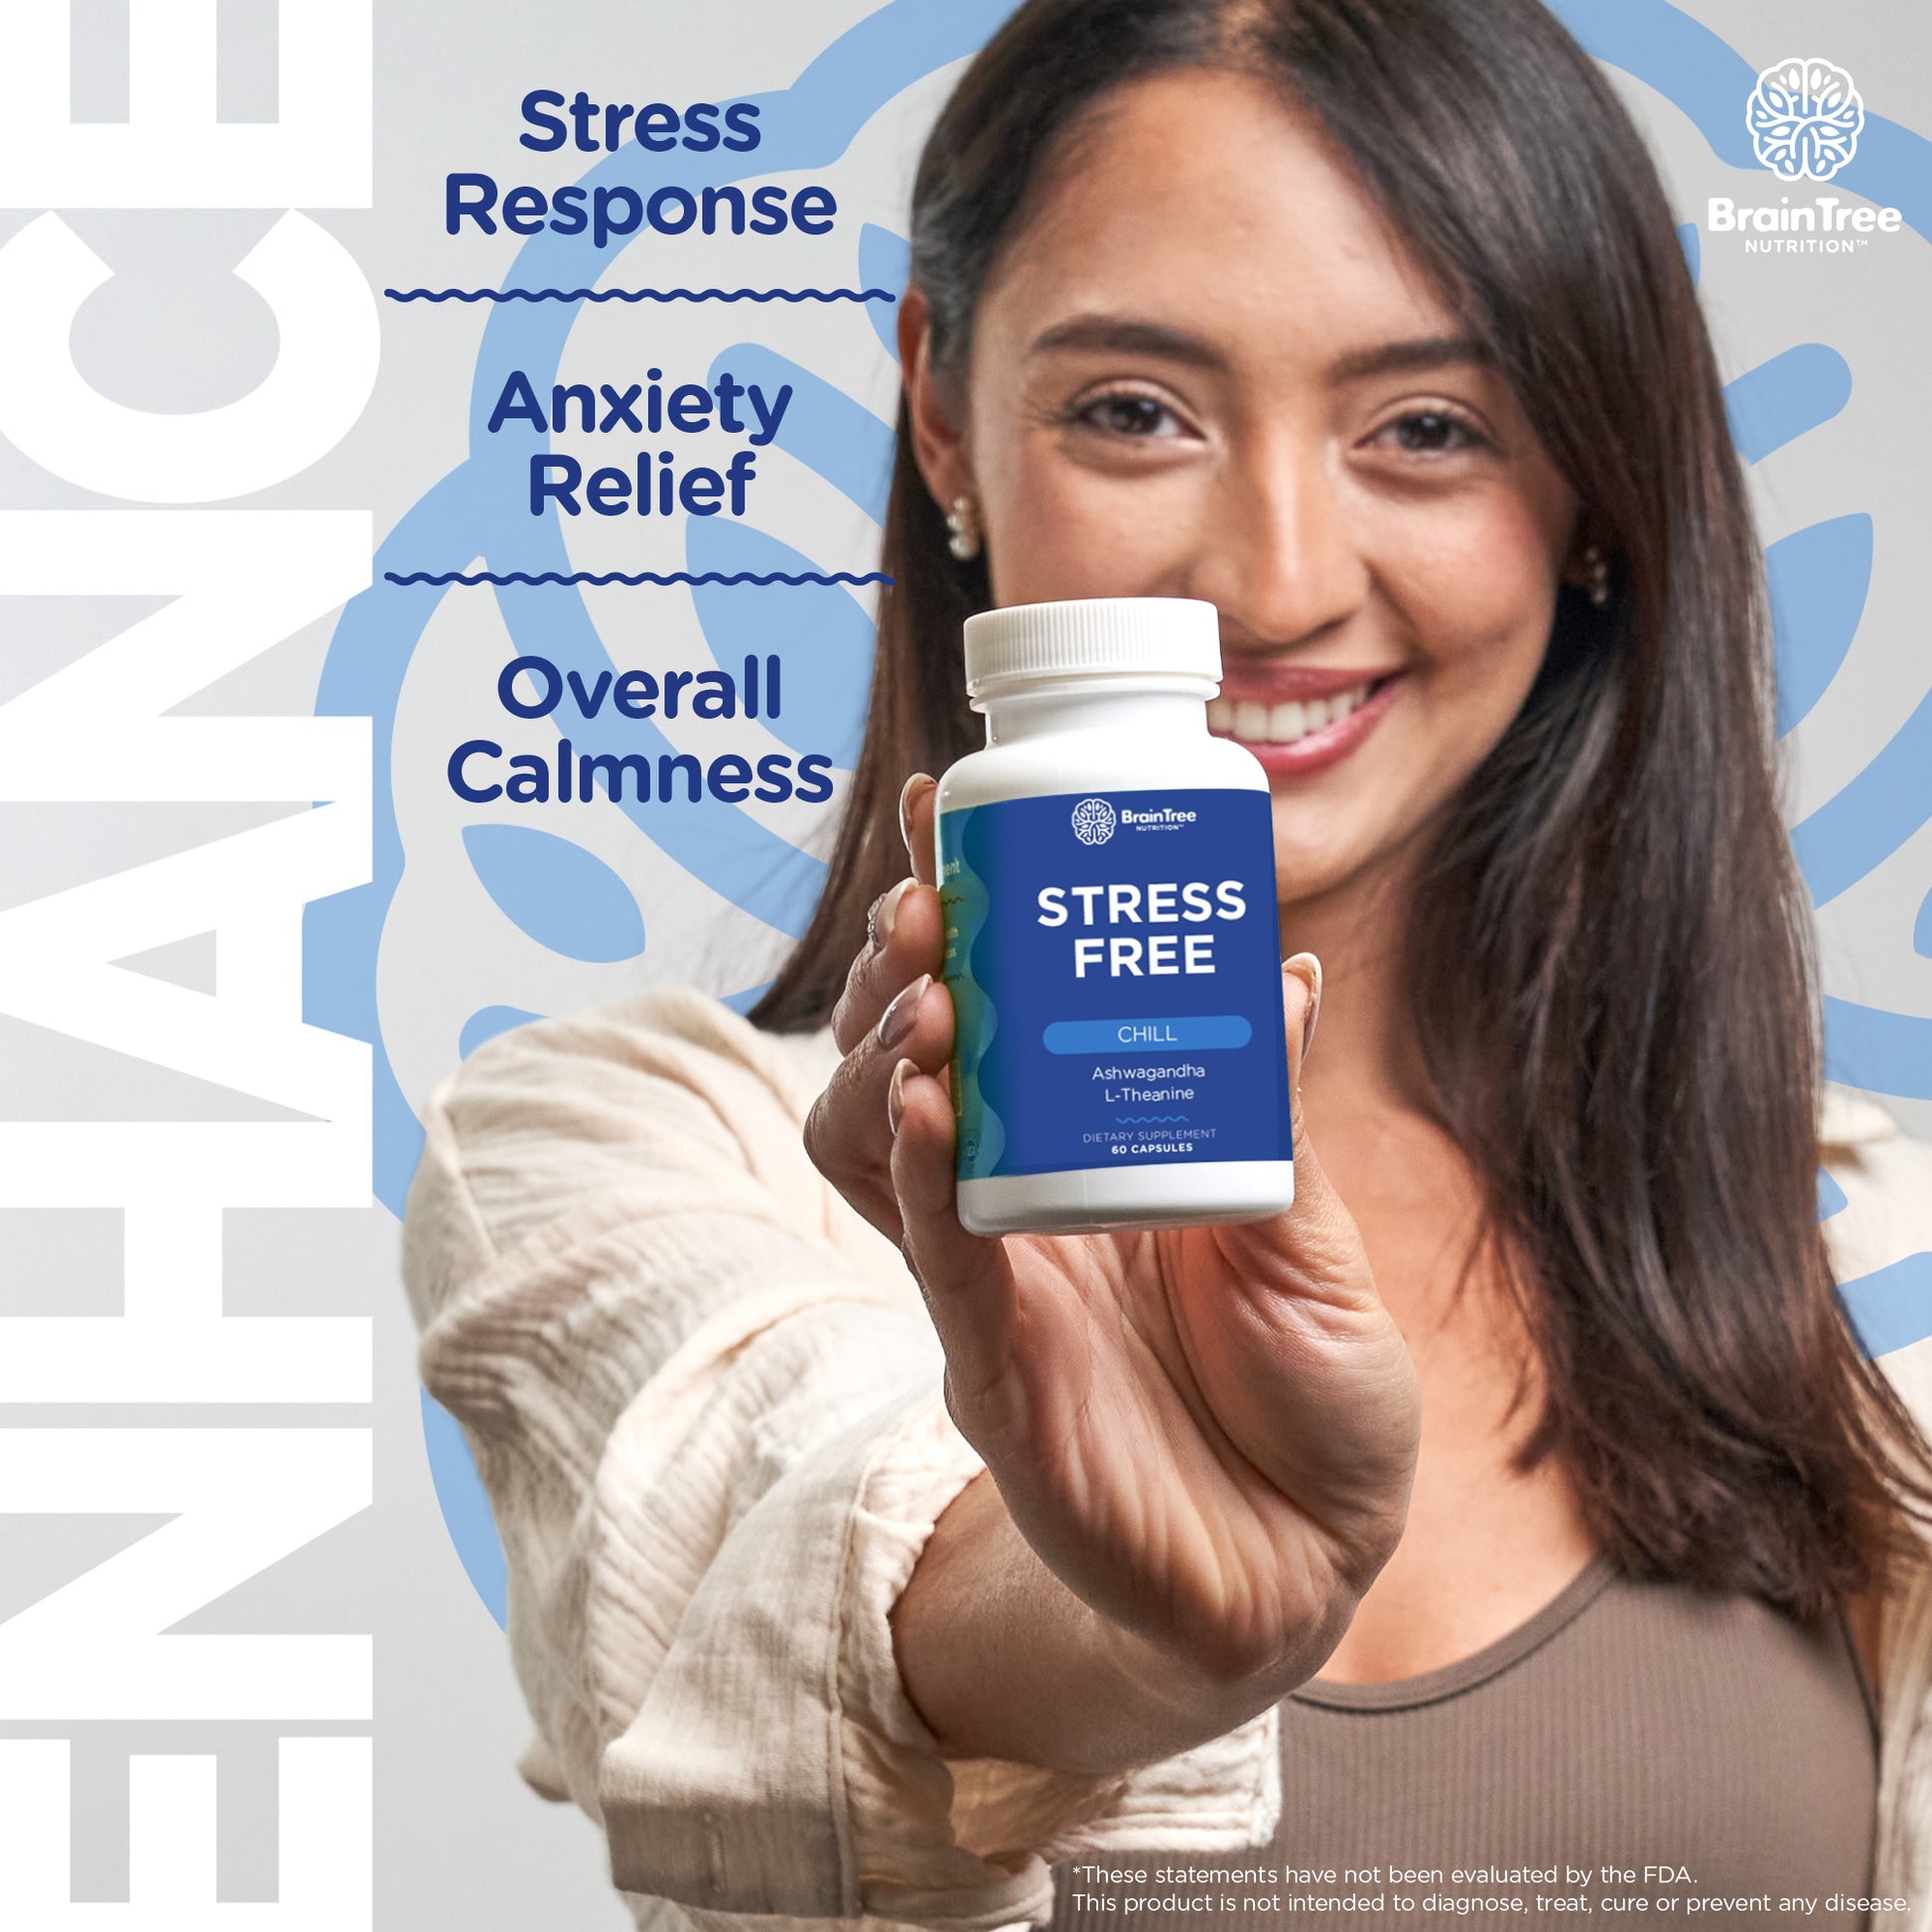 BrainTree Nutrition-Enhance Stress Response Anxiety Relief Overall Calmness